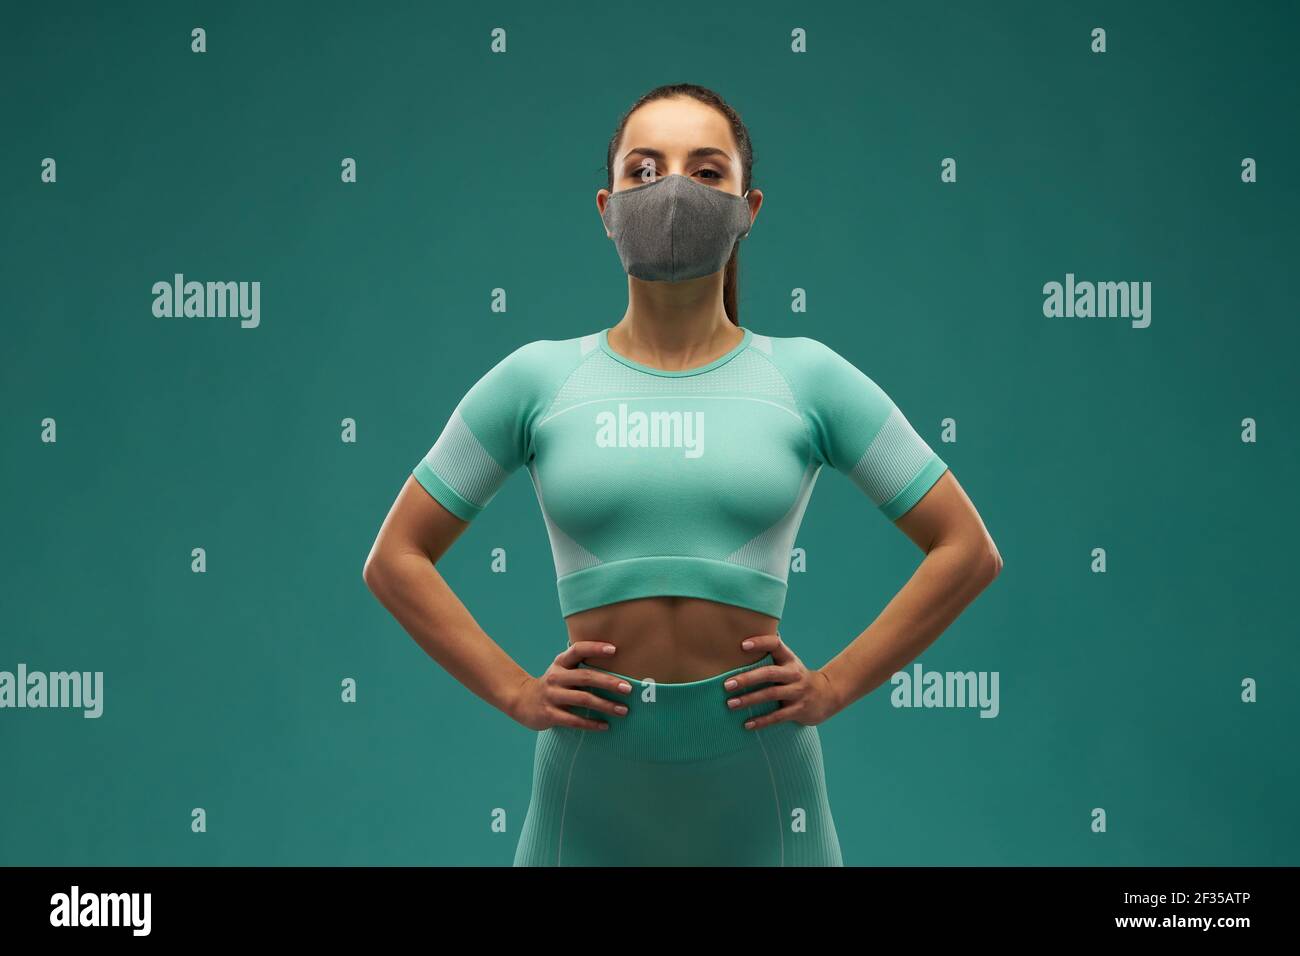 Sporty young woman wearing medical face mask Stock Photo